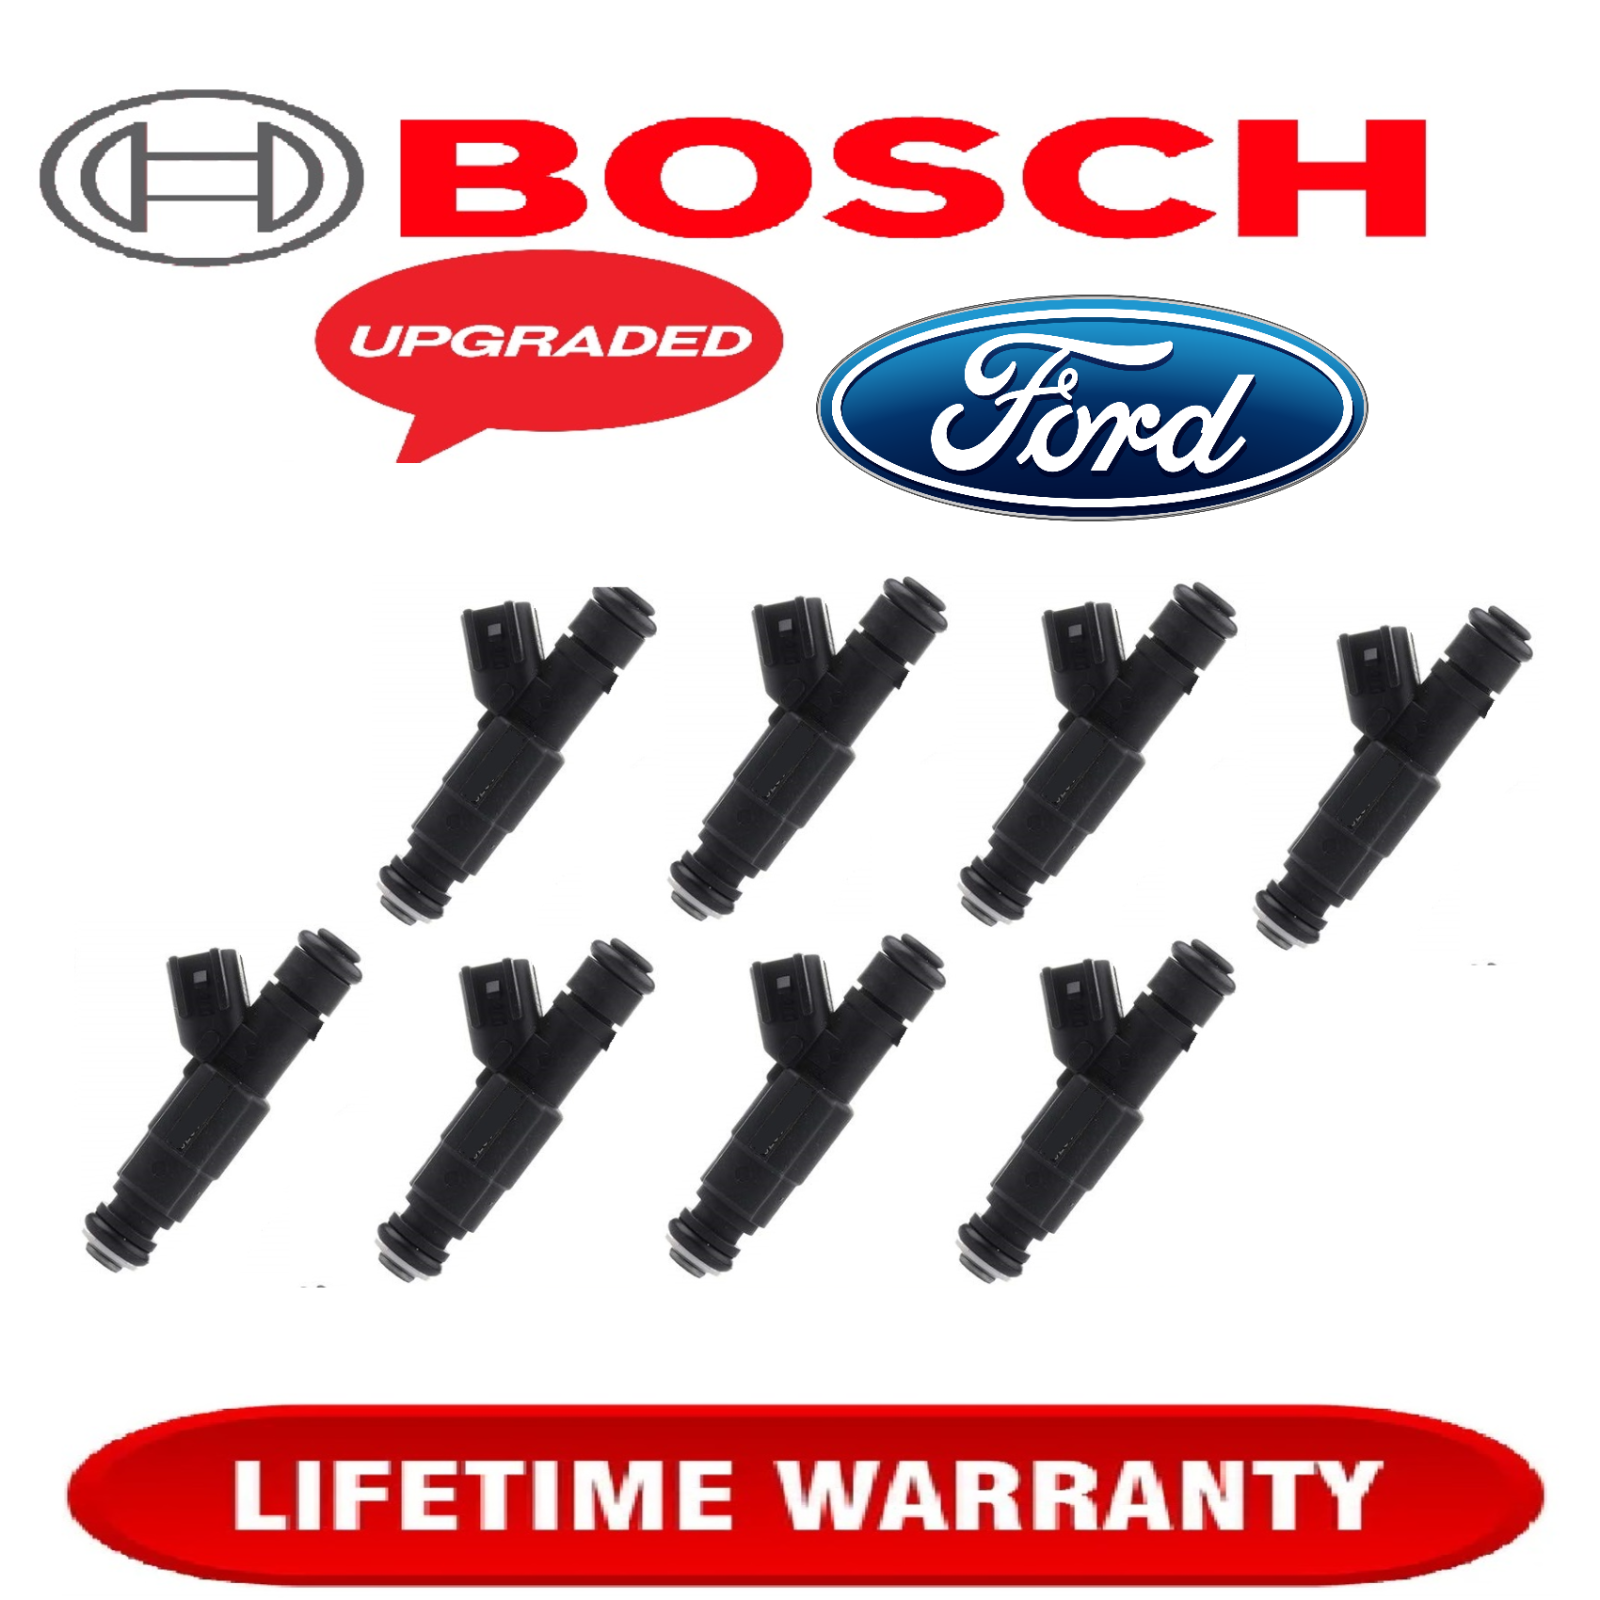 NEW UPGRADED OEM Bosch x8 4hole IVgen 19LB Fuel Injectors for 2011-2019 Ford 5.0 - $141.07